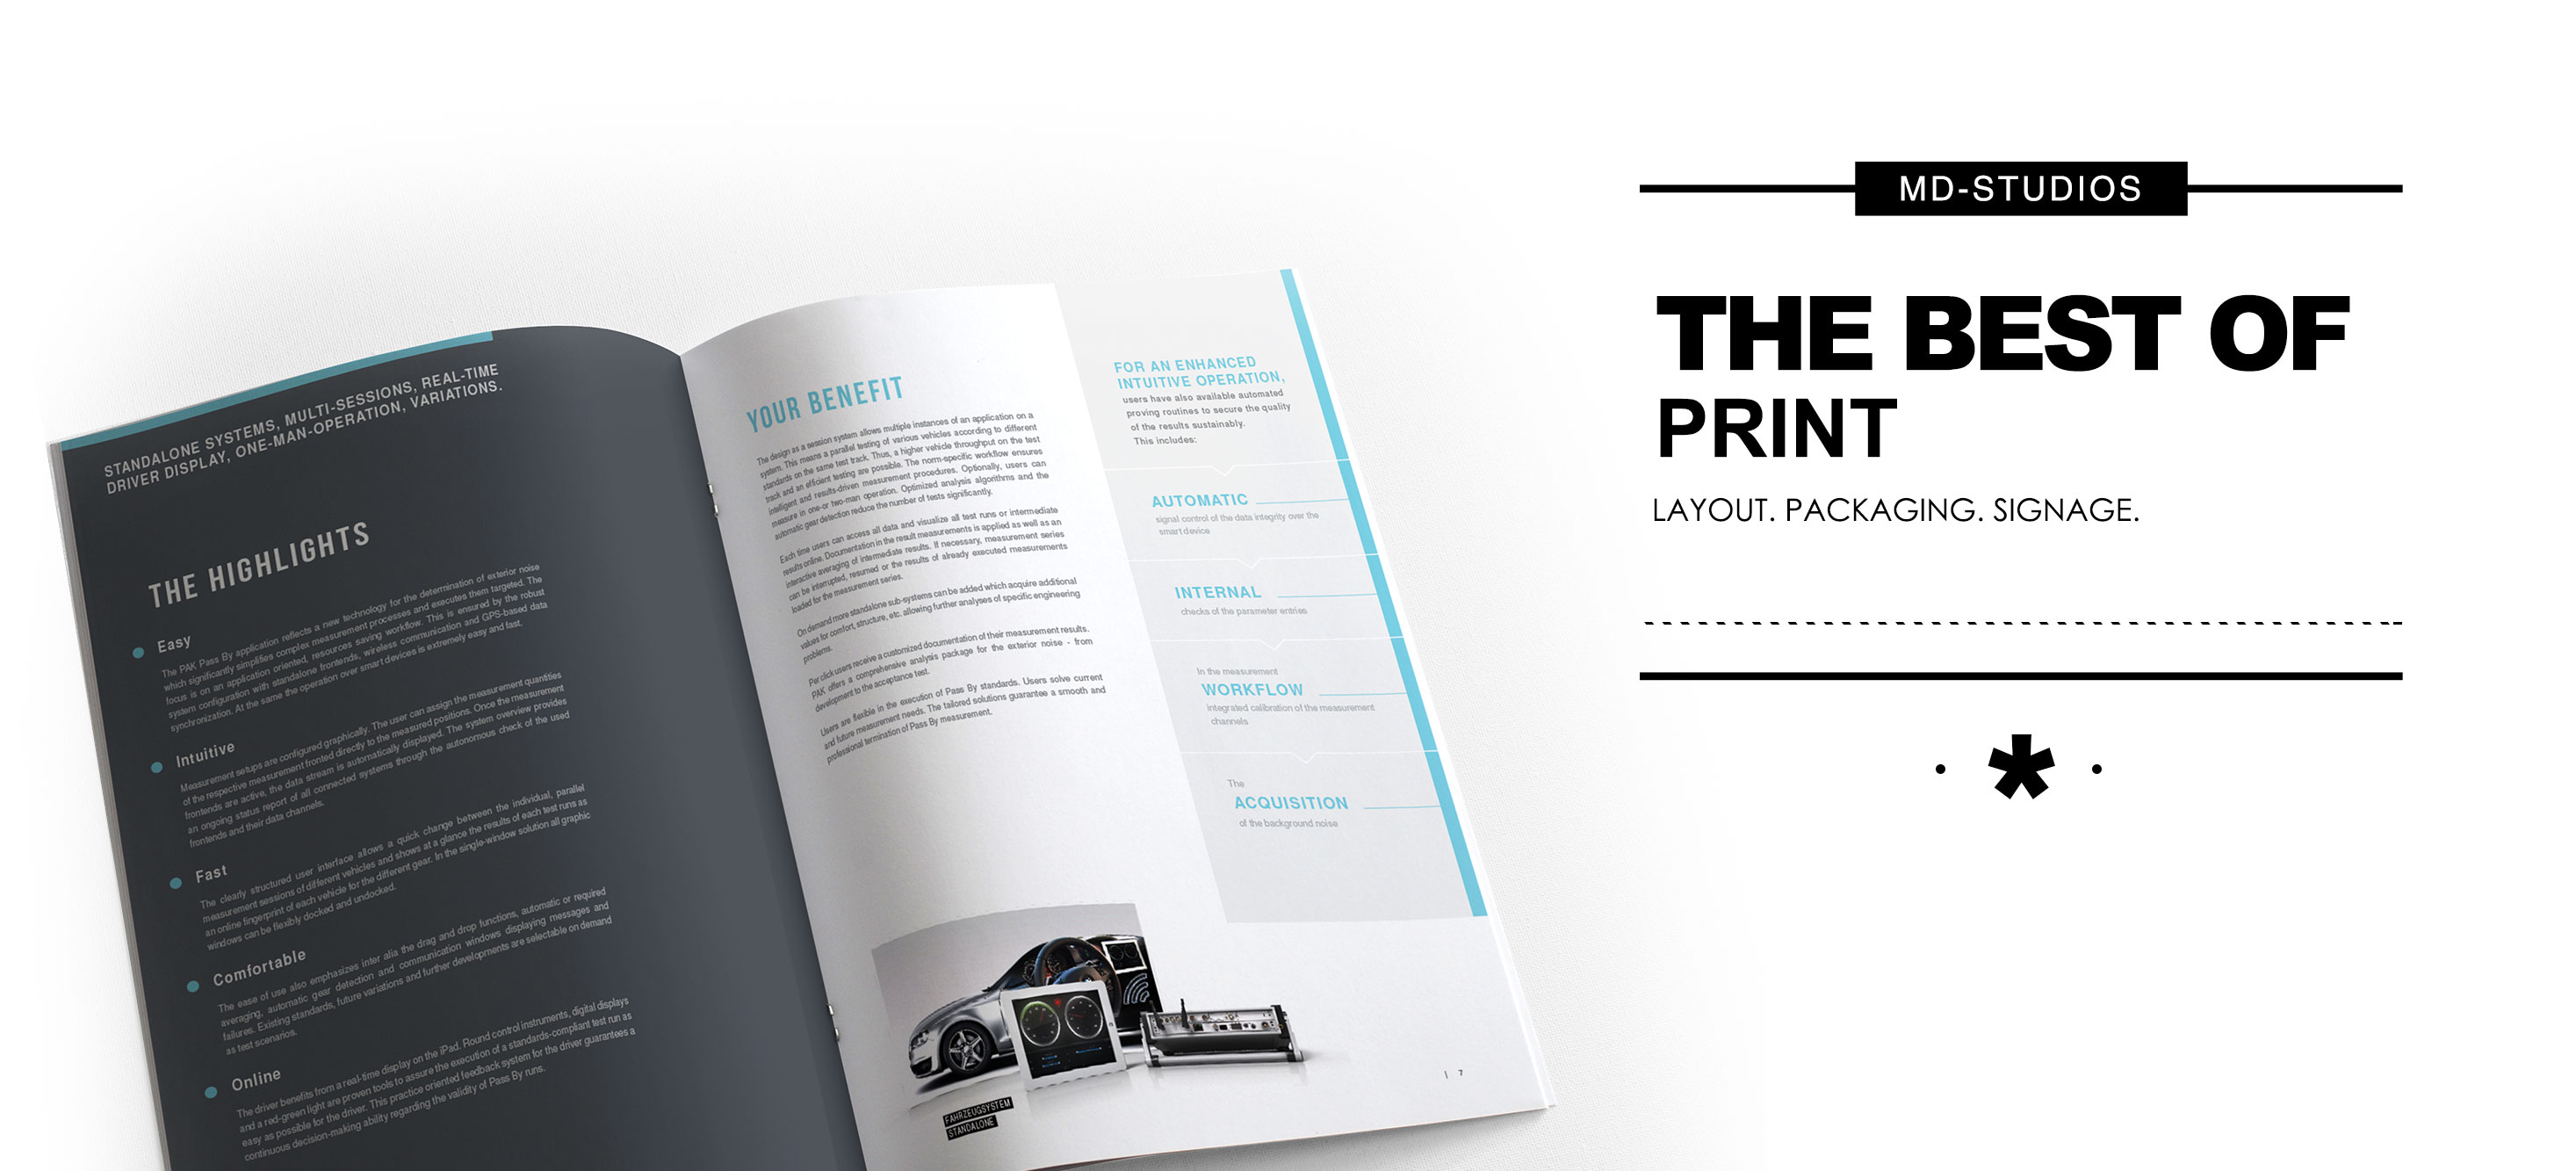 Print Design - Layout, Packaging, Signage